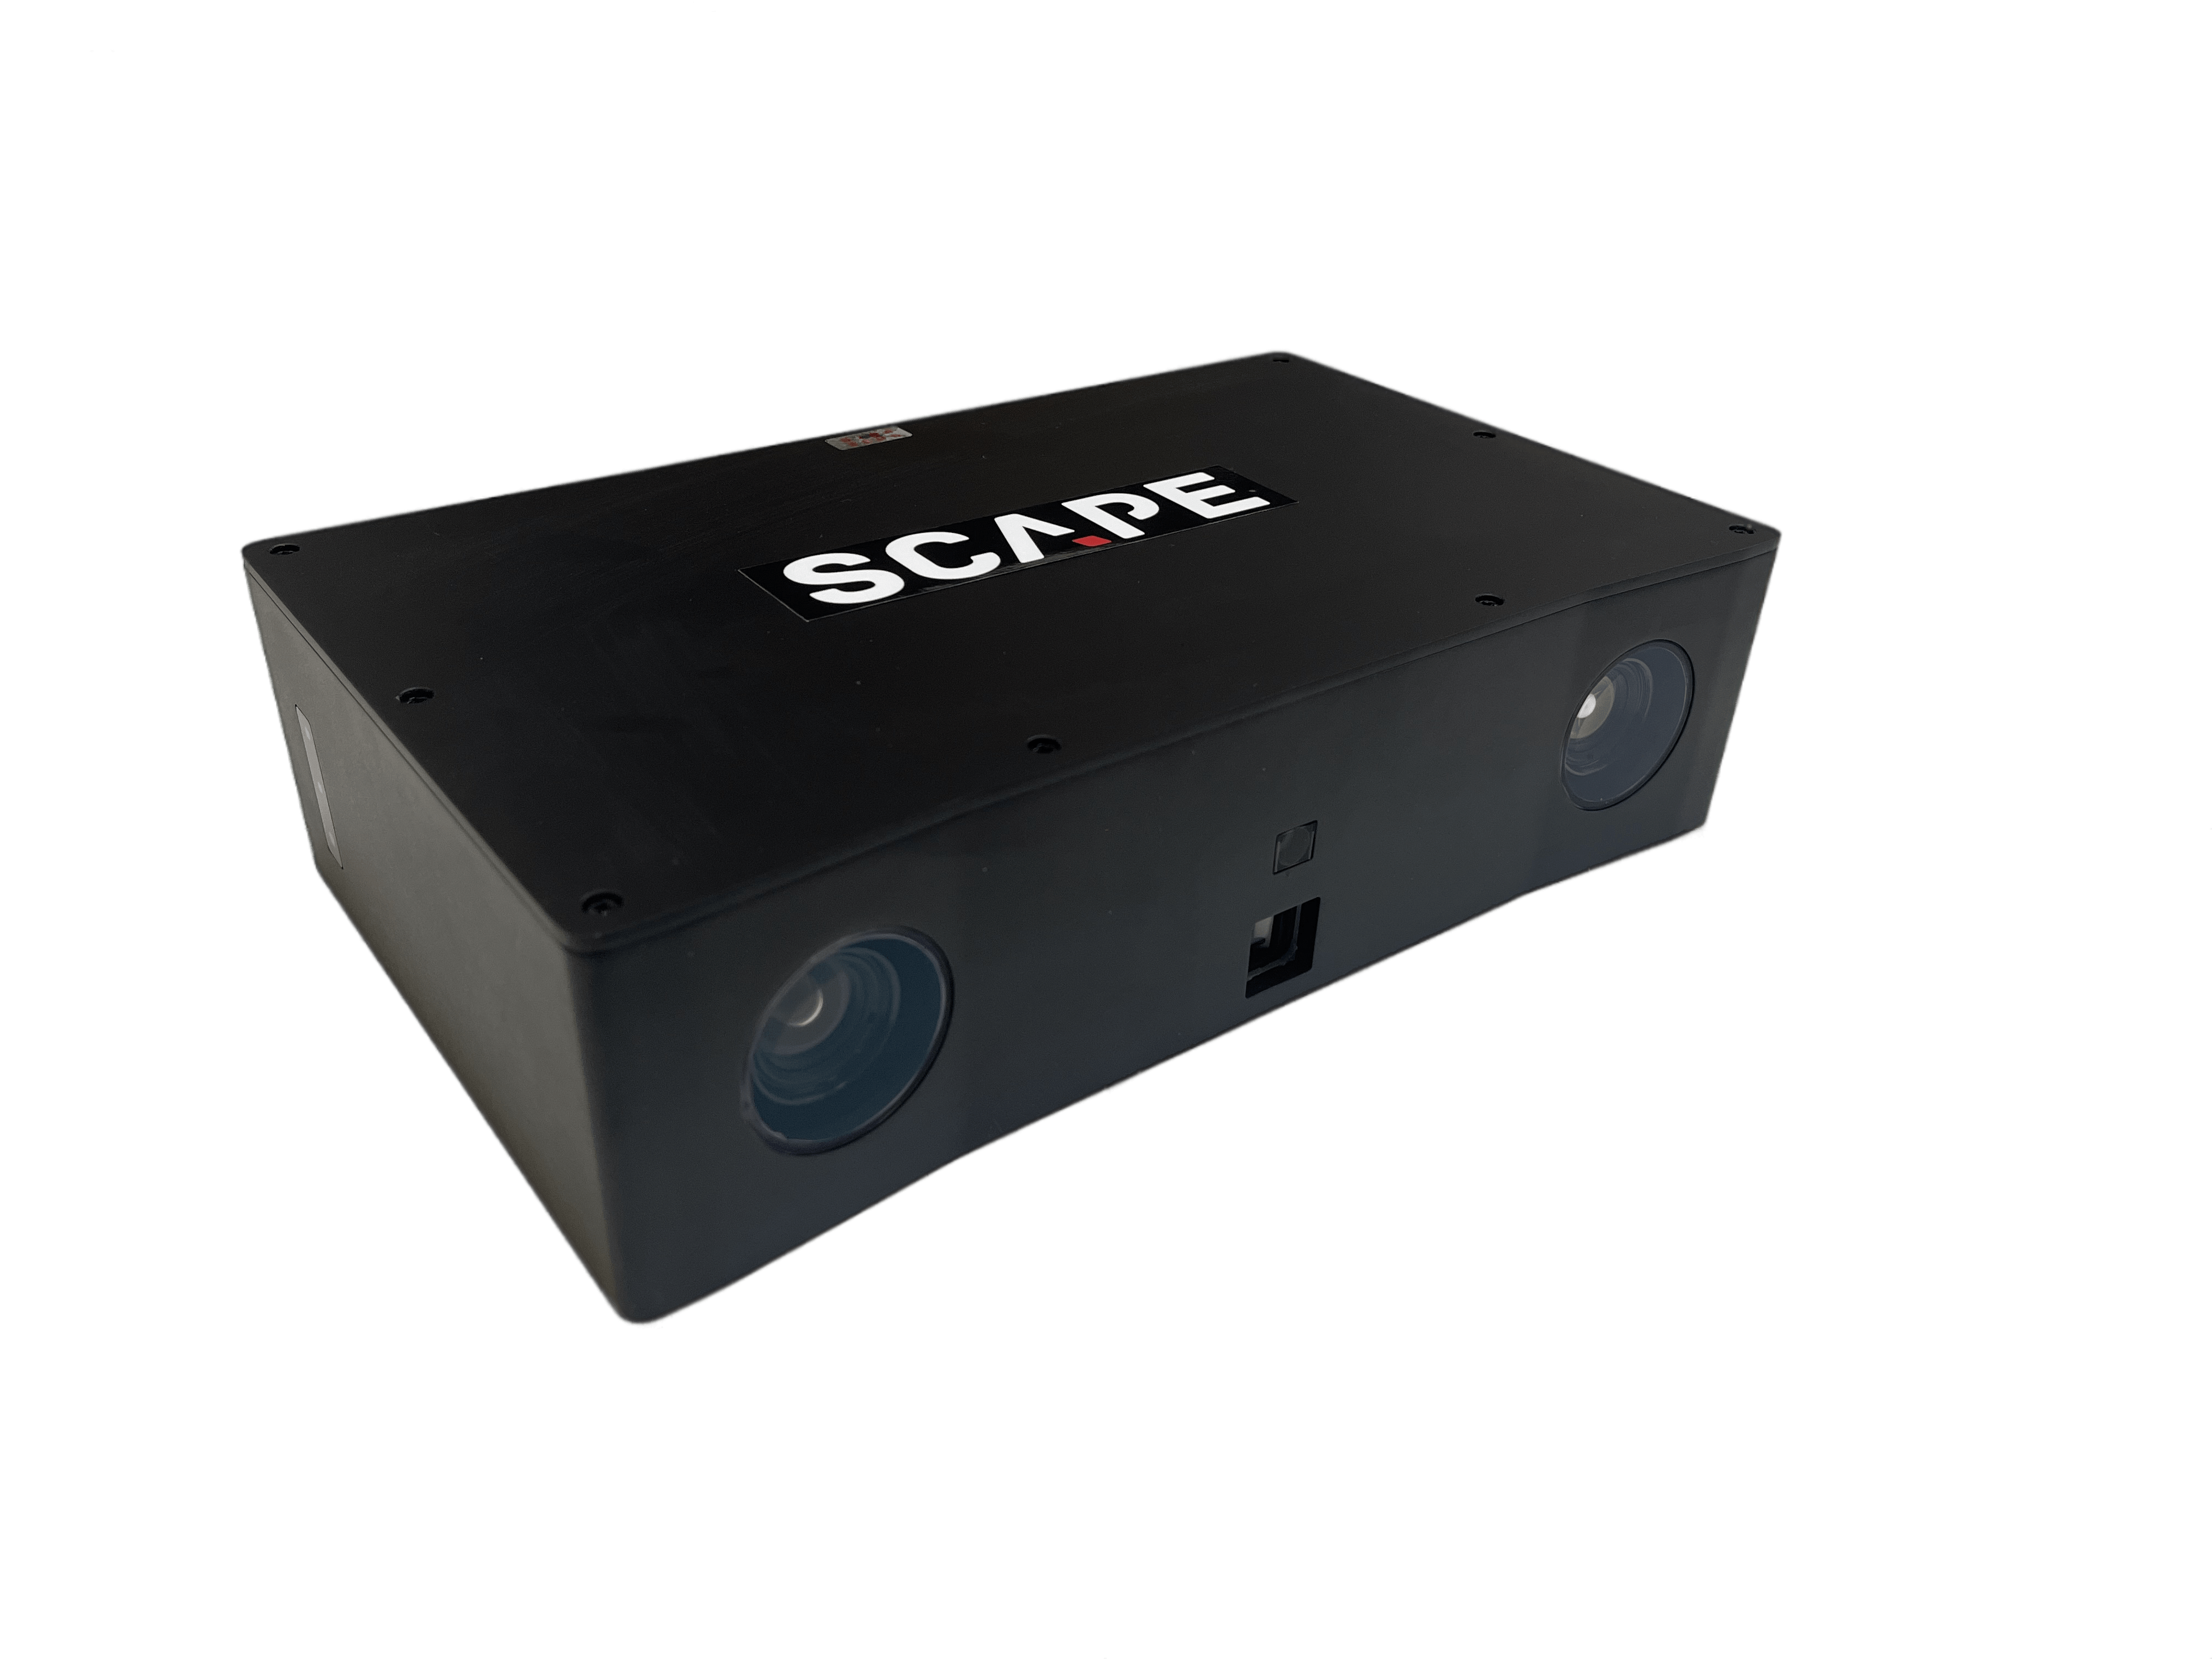 Introducing our new scanner for object recognition. The SCAPE PRO INDUSTRIAL 3D Scanners